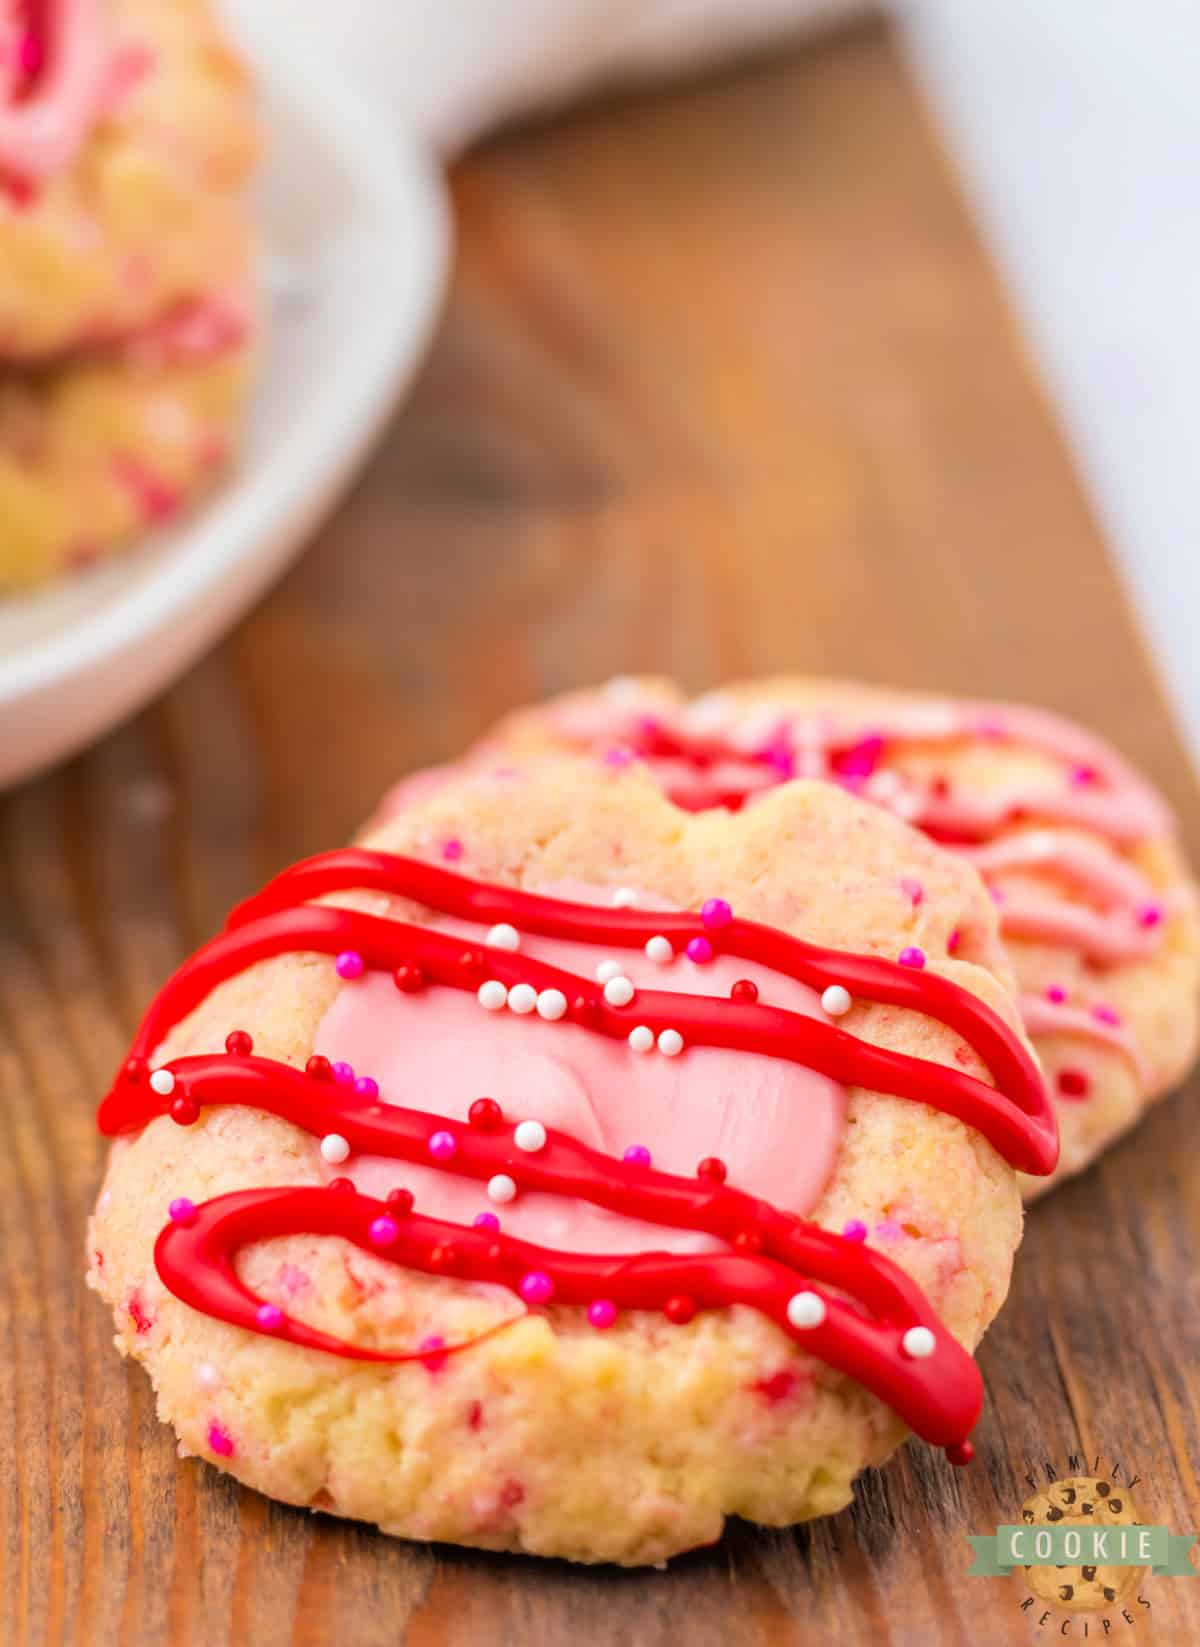 Buttery cookie with pink chocolate filling with a red chocolate drizzle. 